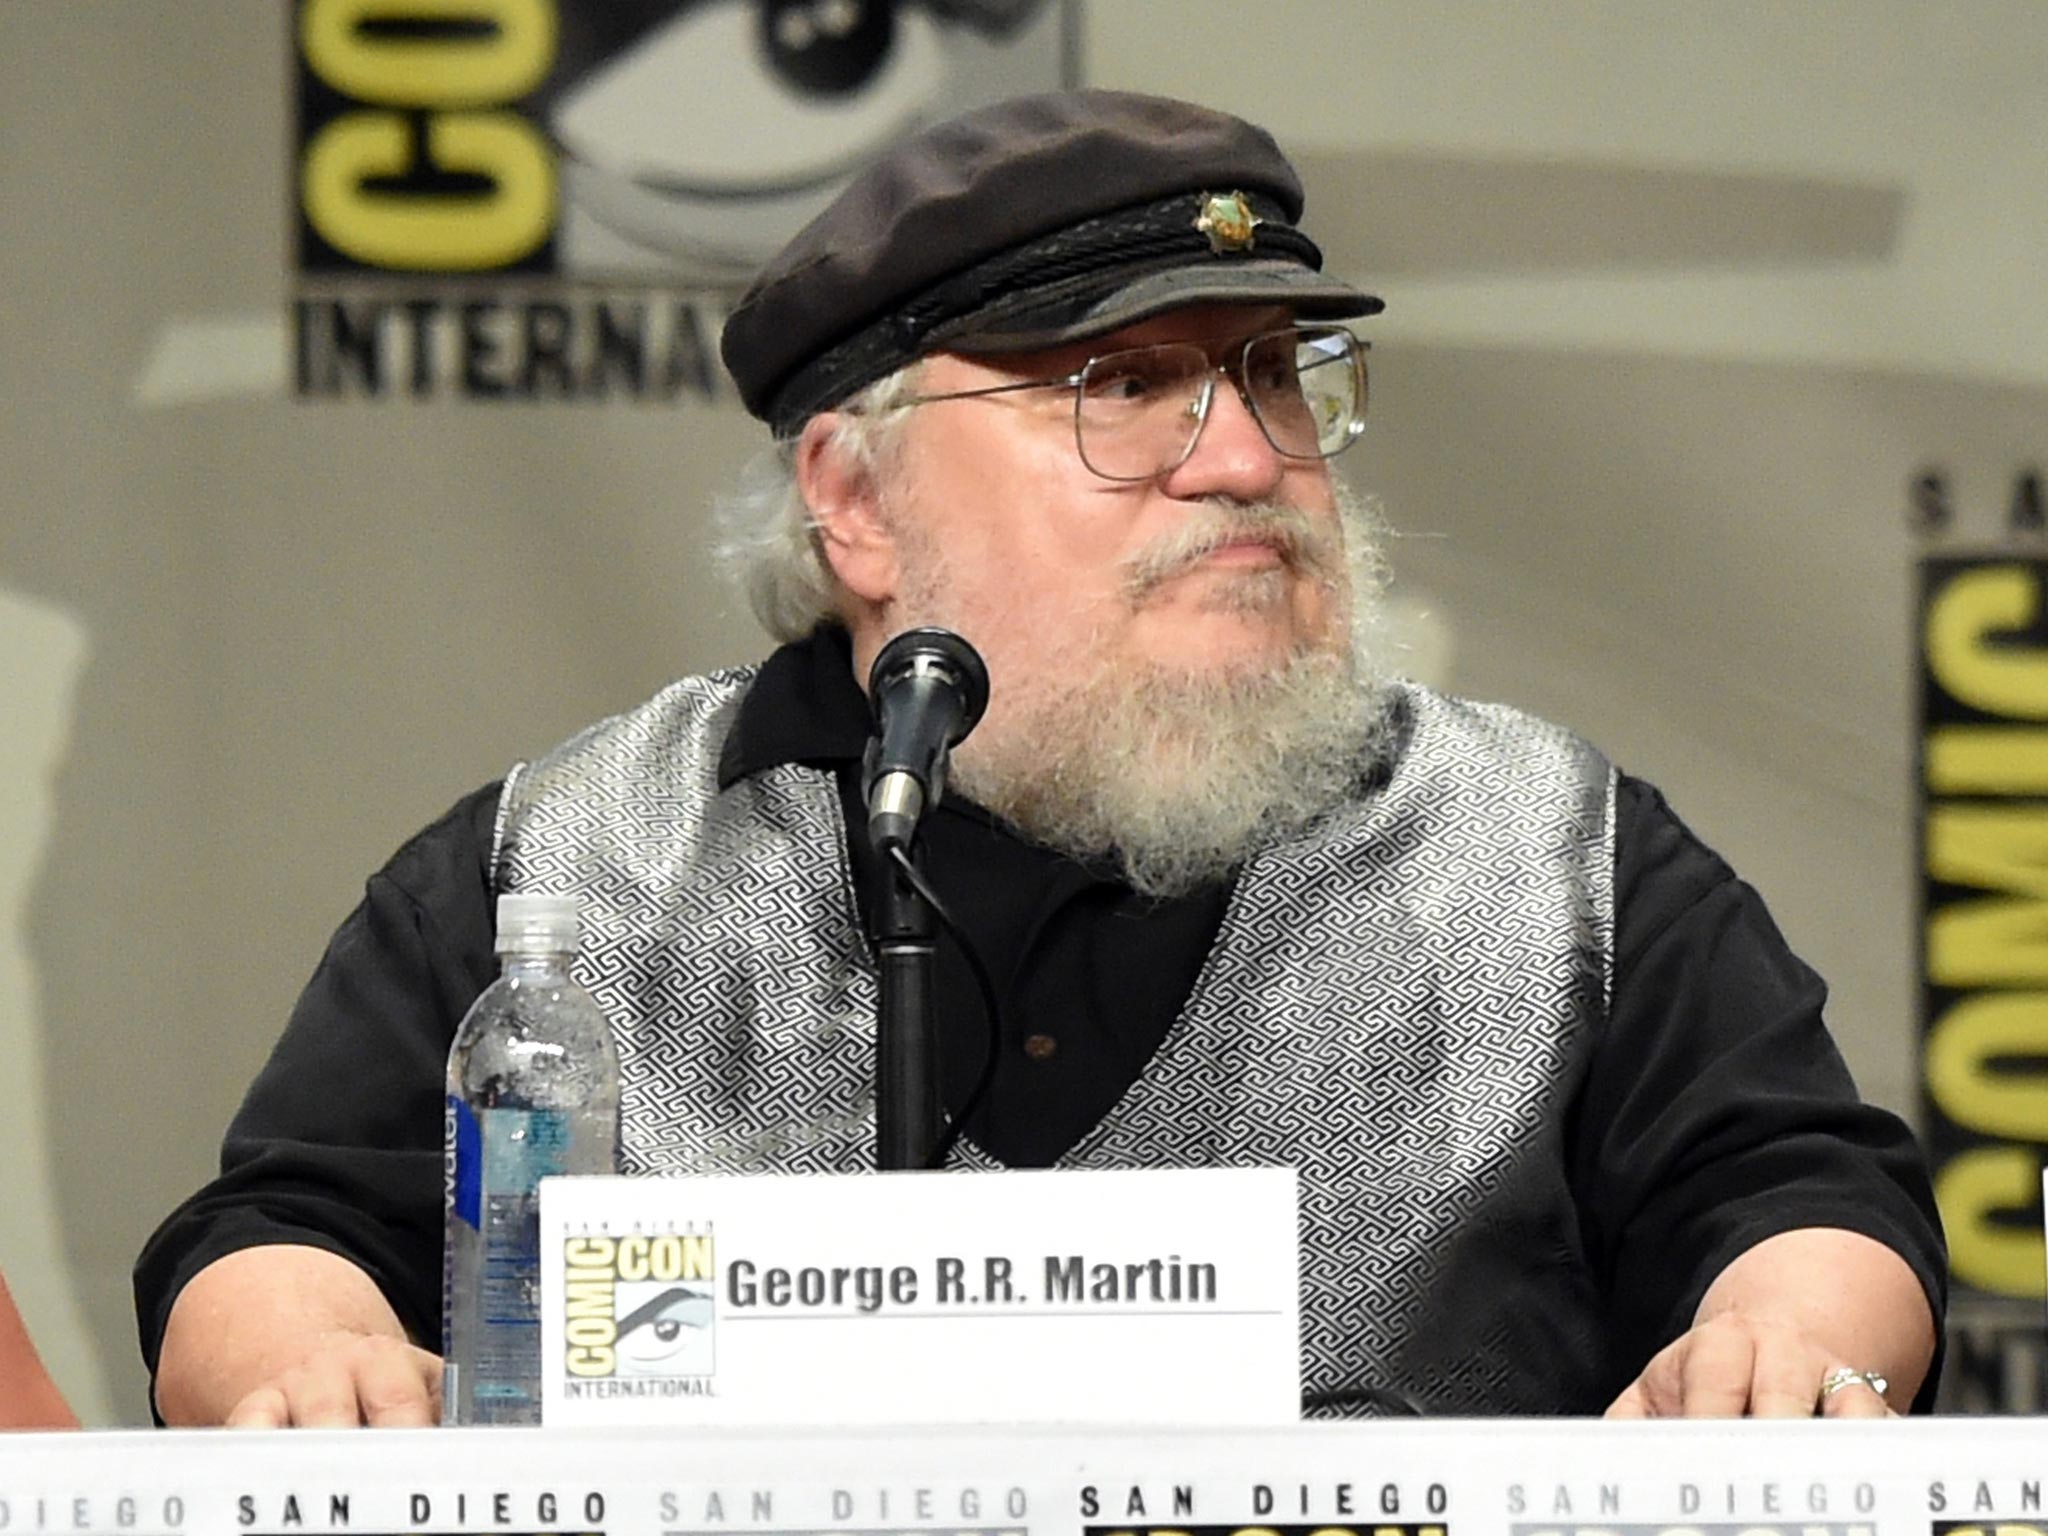 Game of Thrones season 5 cast: Nine new characters announced at Comic-Con 2014 | The ...